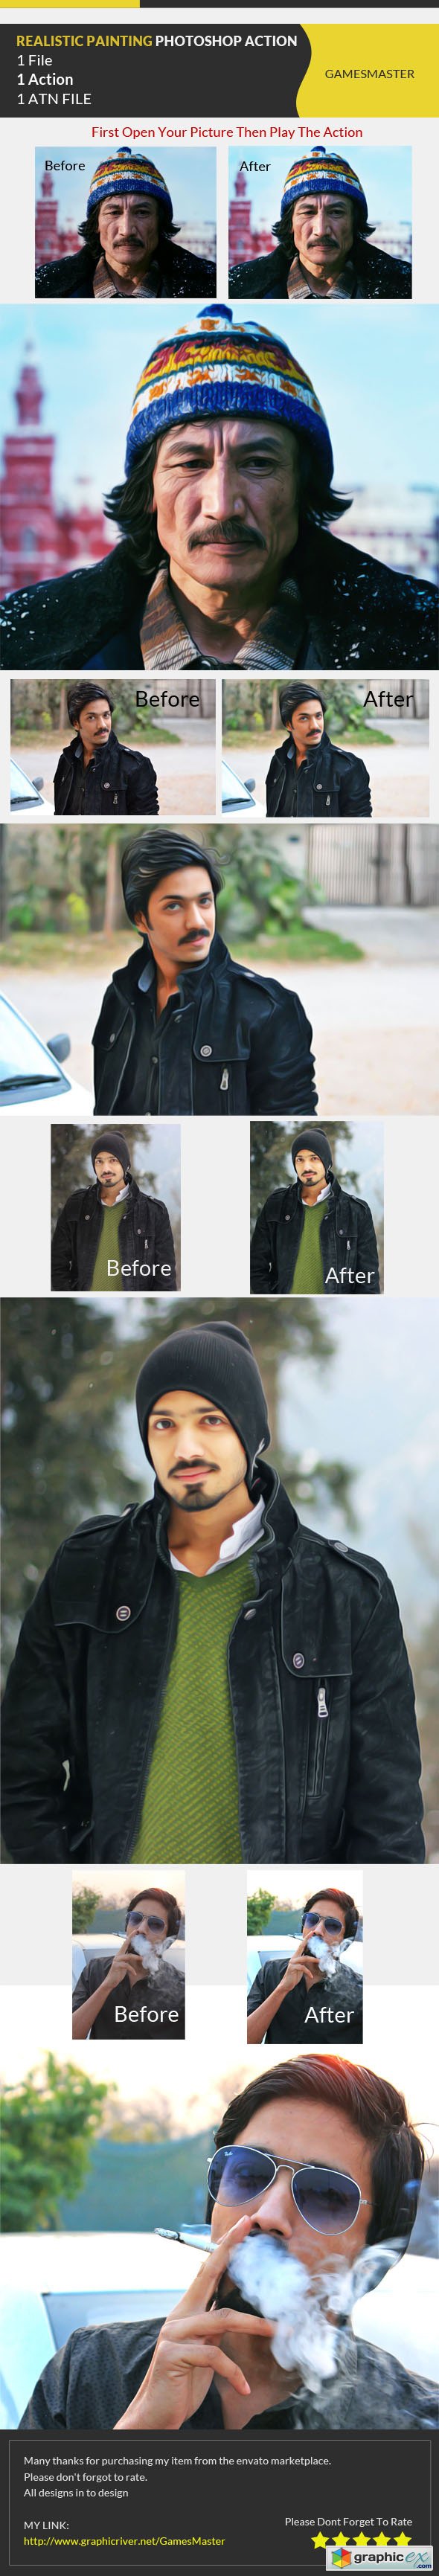 Realistic Painting Effect Photoshop Action